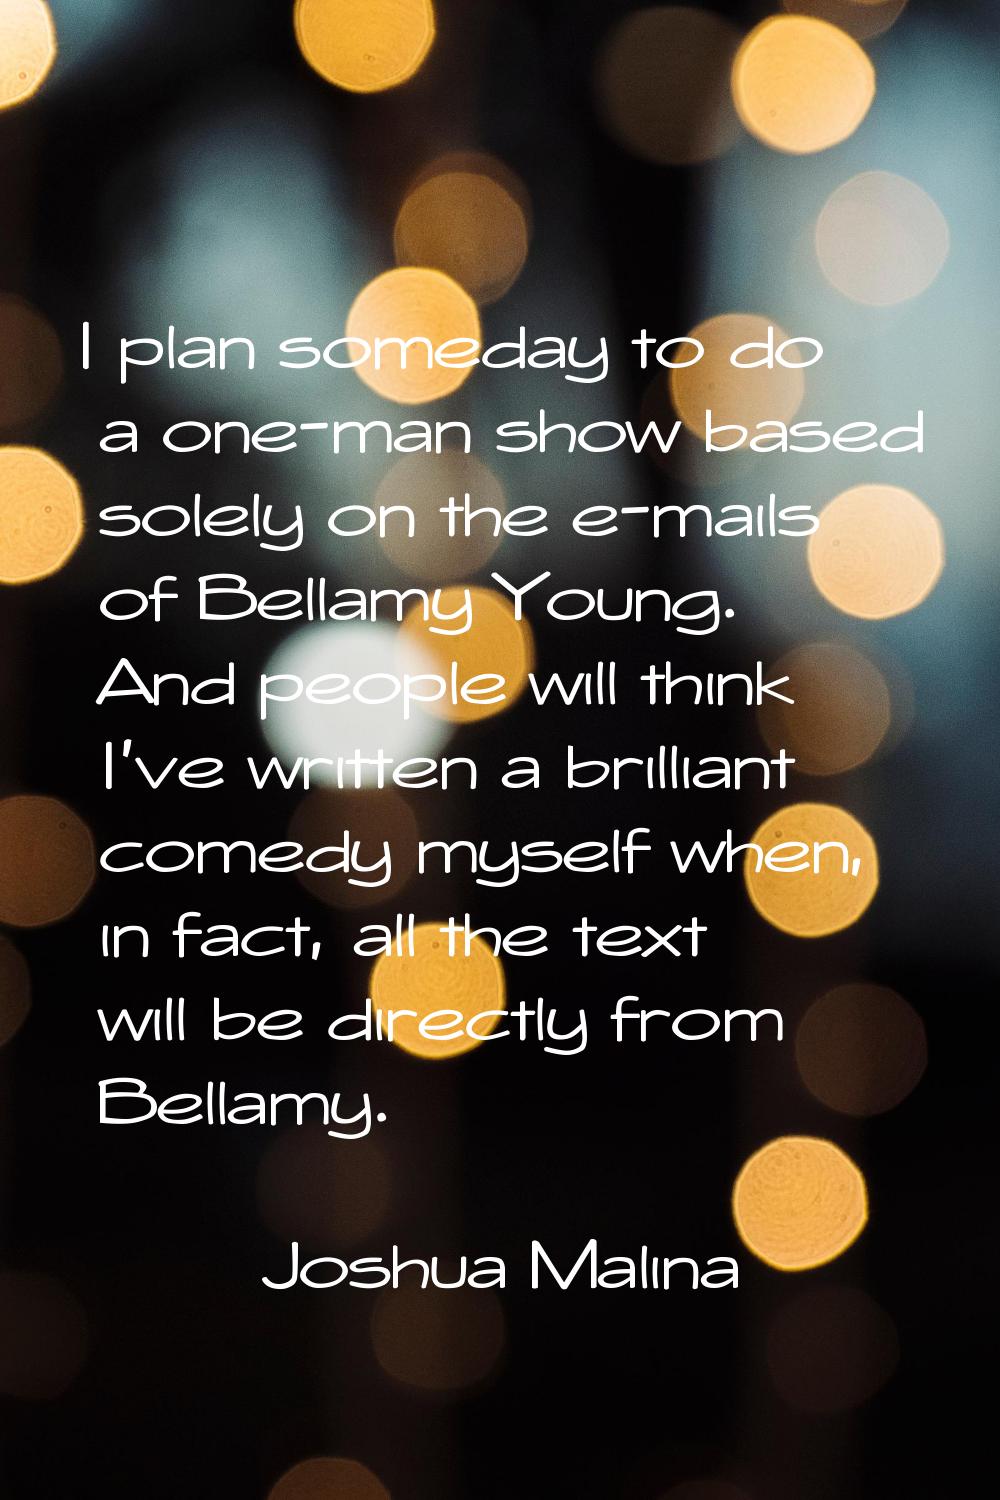 I plan someday to do a one-man show based solely on the e-mails of Bellamy Young. And people will t